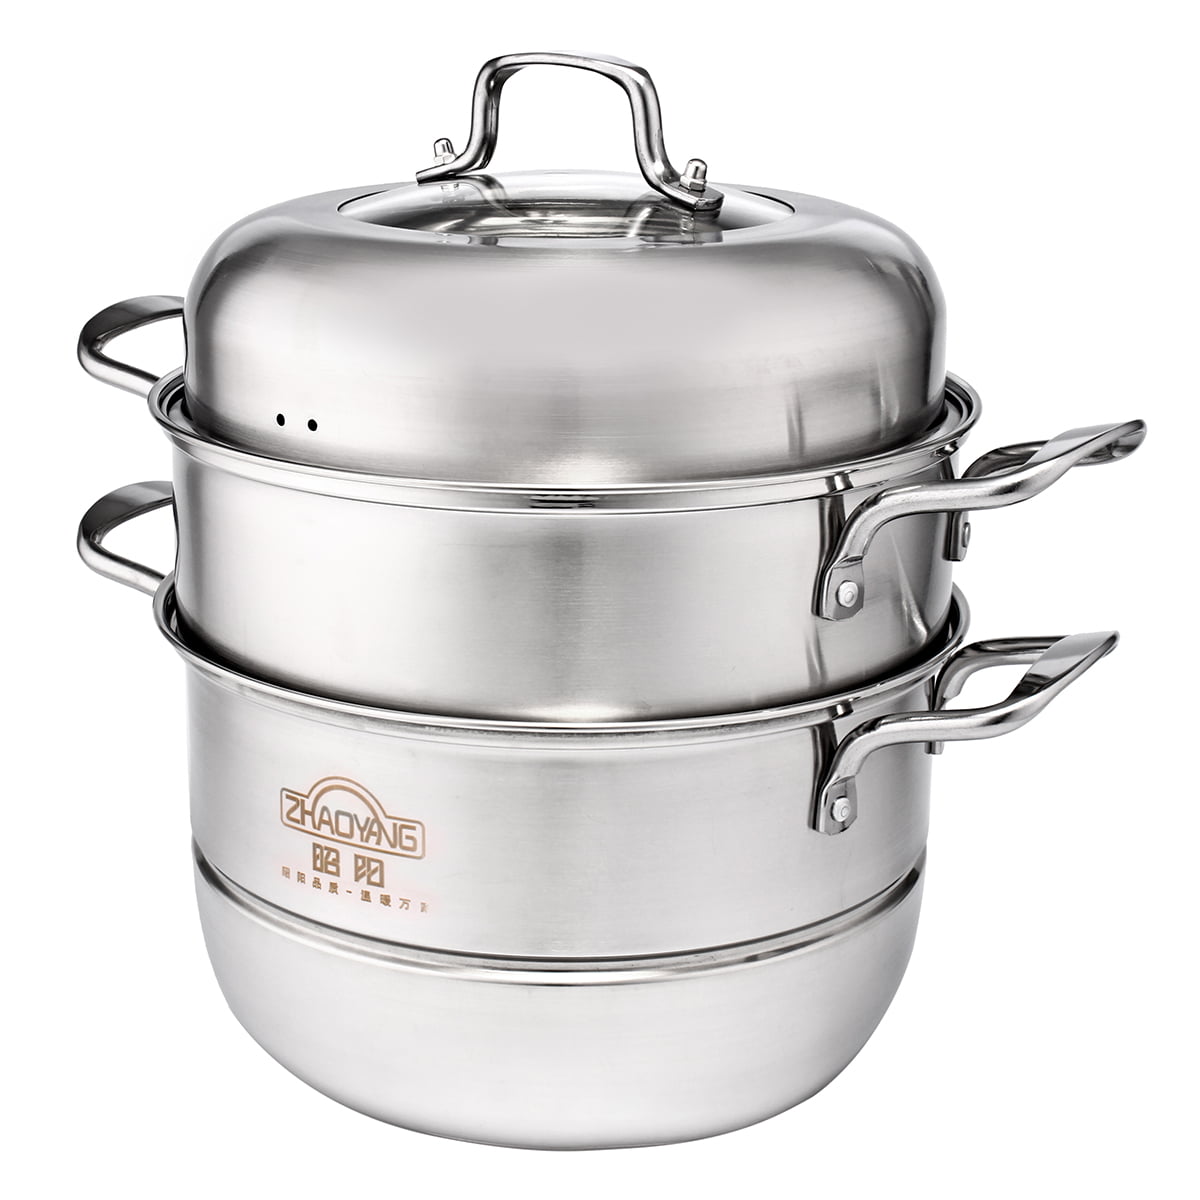 3 Tier Stainless Steel Steamer Steam Pot Cooker Cookware with Glass Lid \ 